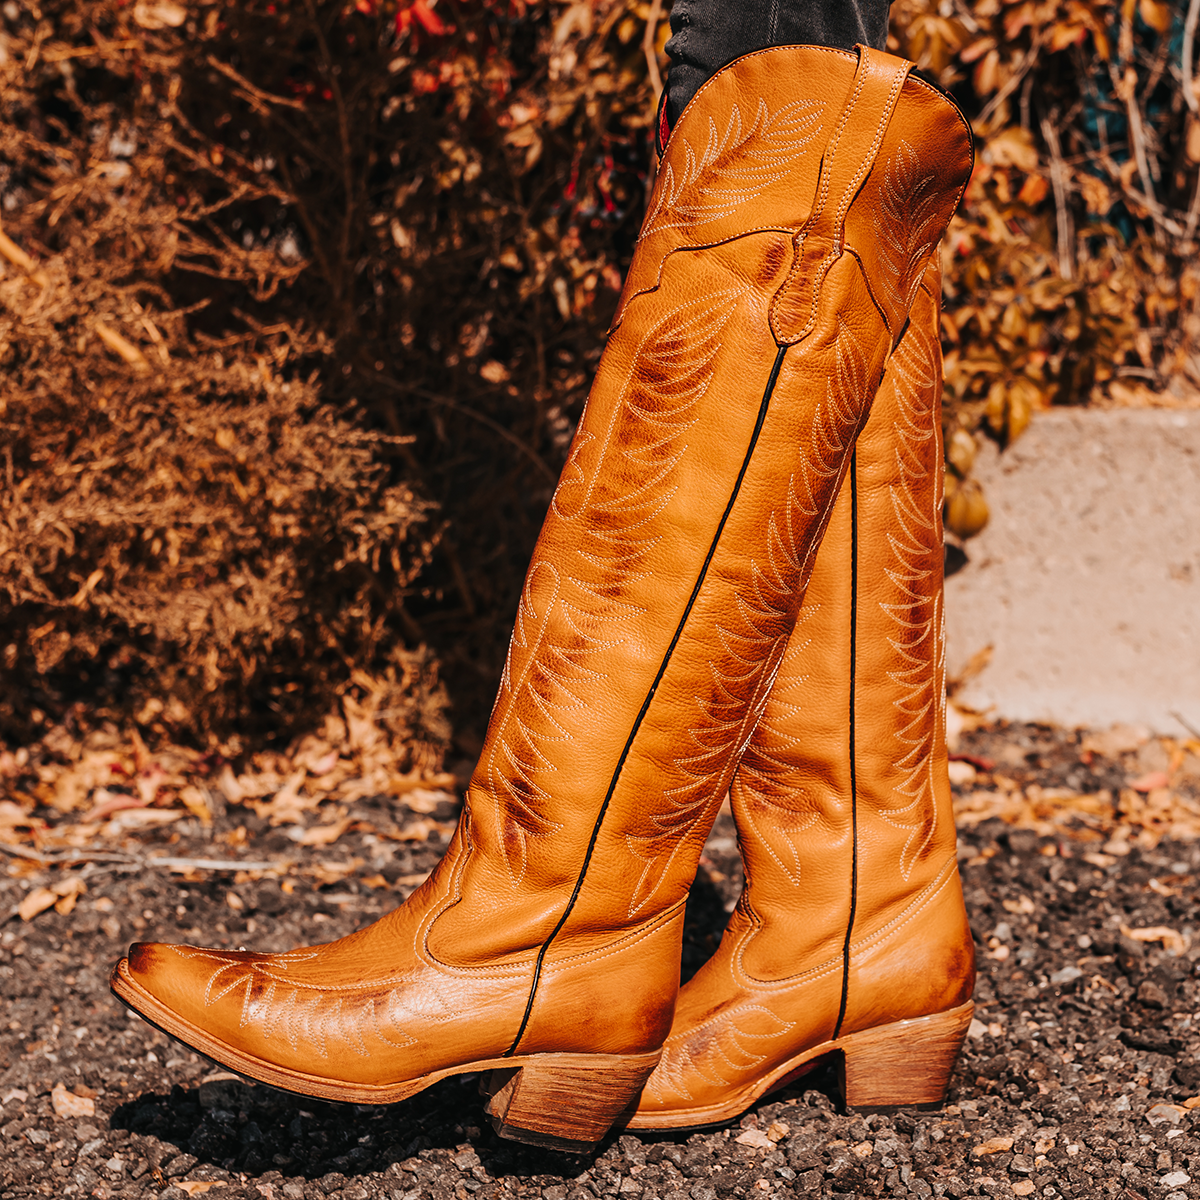 FREEBIRD women's Misty wheat leather tall boot with western stitch detailing and traditional snip toe construction